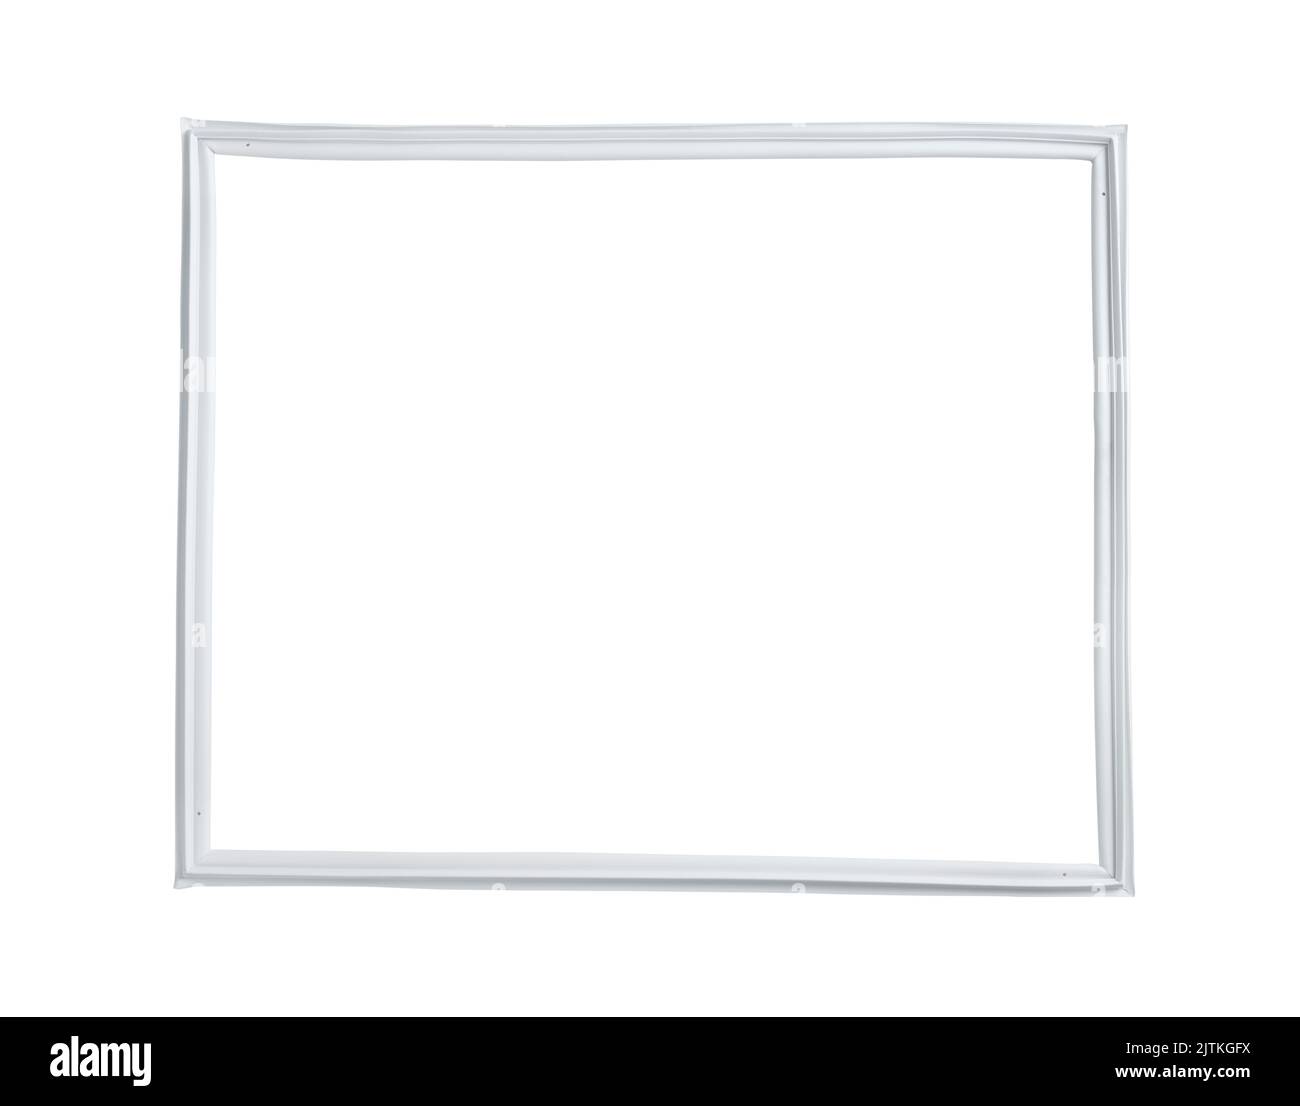 Front view of refrigerator door gasket seal isolated on white Stock Photo